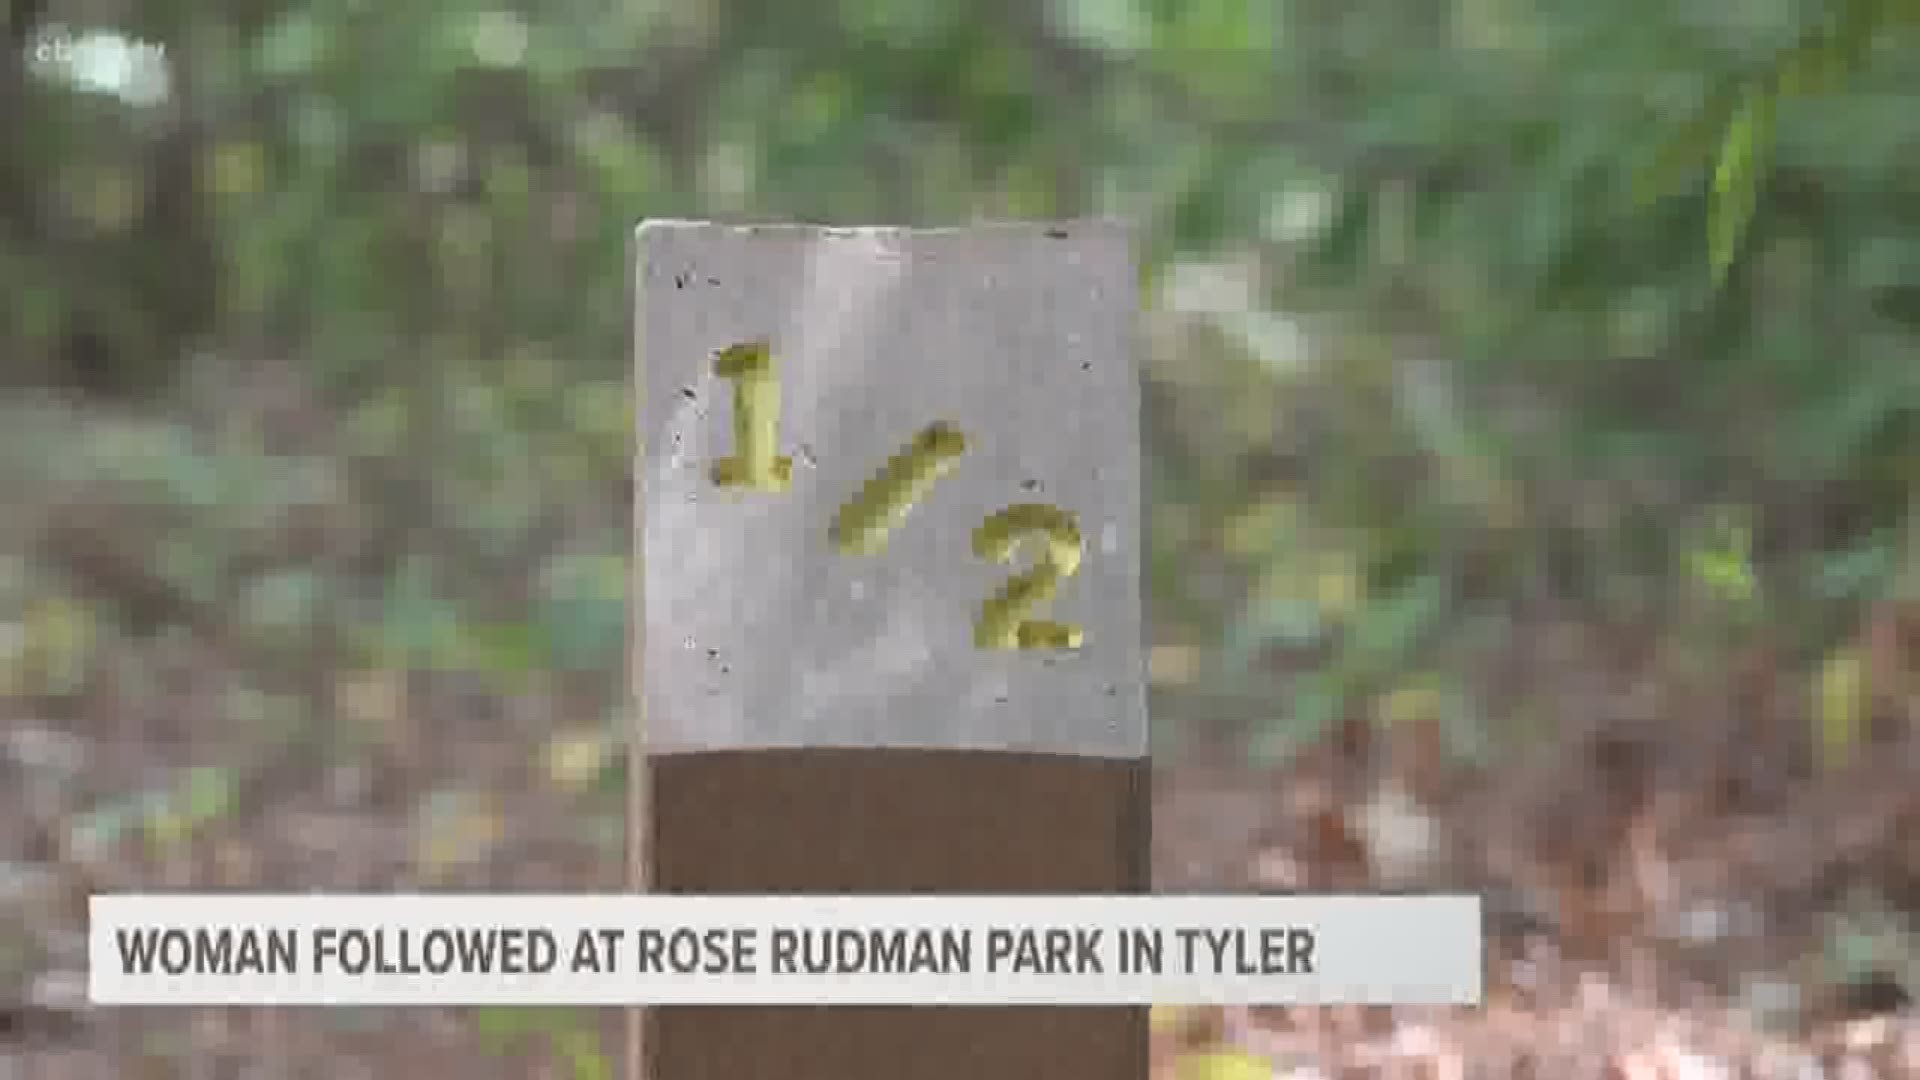 While Morgan Magee was having her daily visit to the park, she says a man blocked her path and then stalked her.